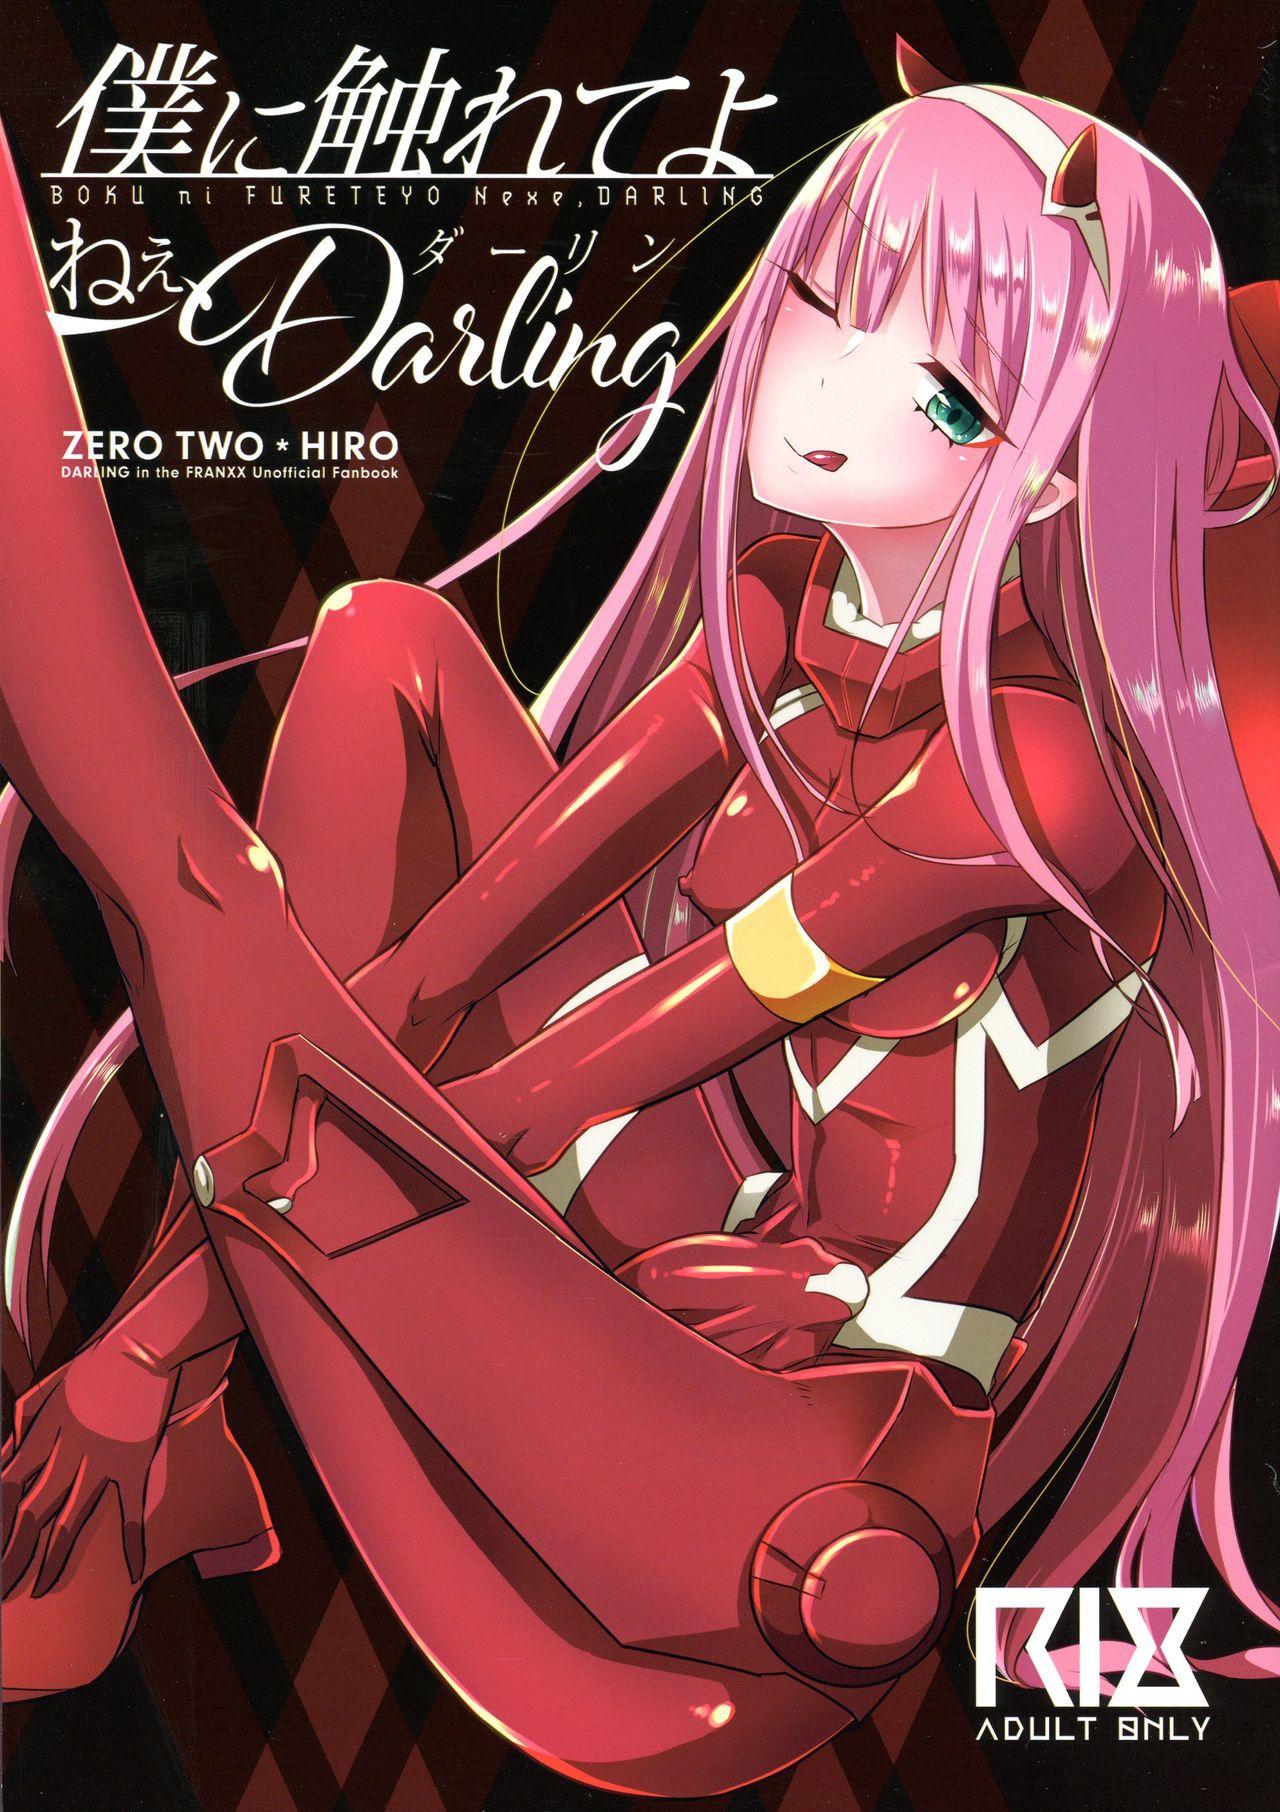 cathy vargas share darling and the franxx hentai photos